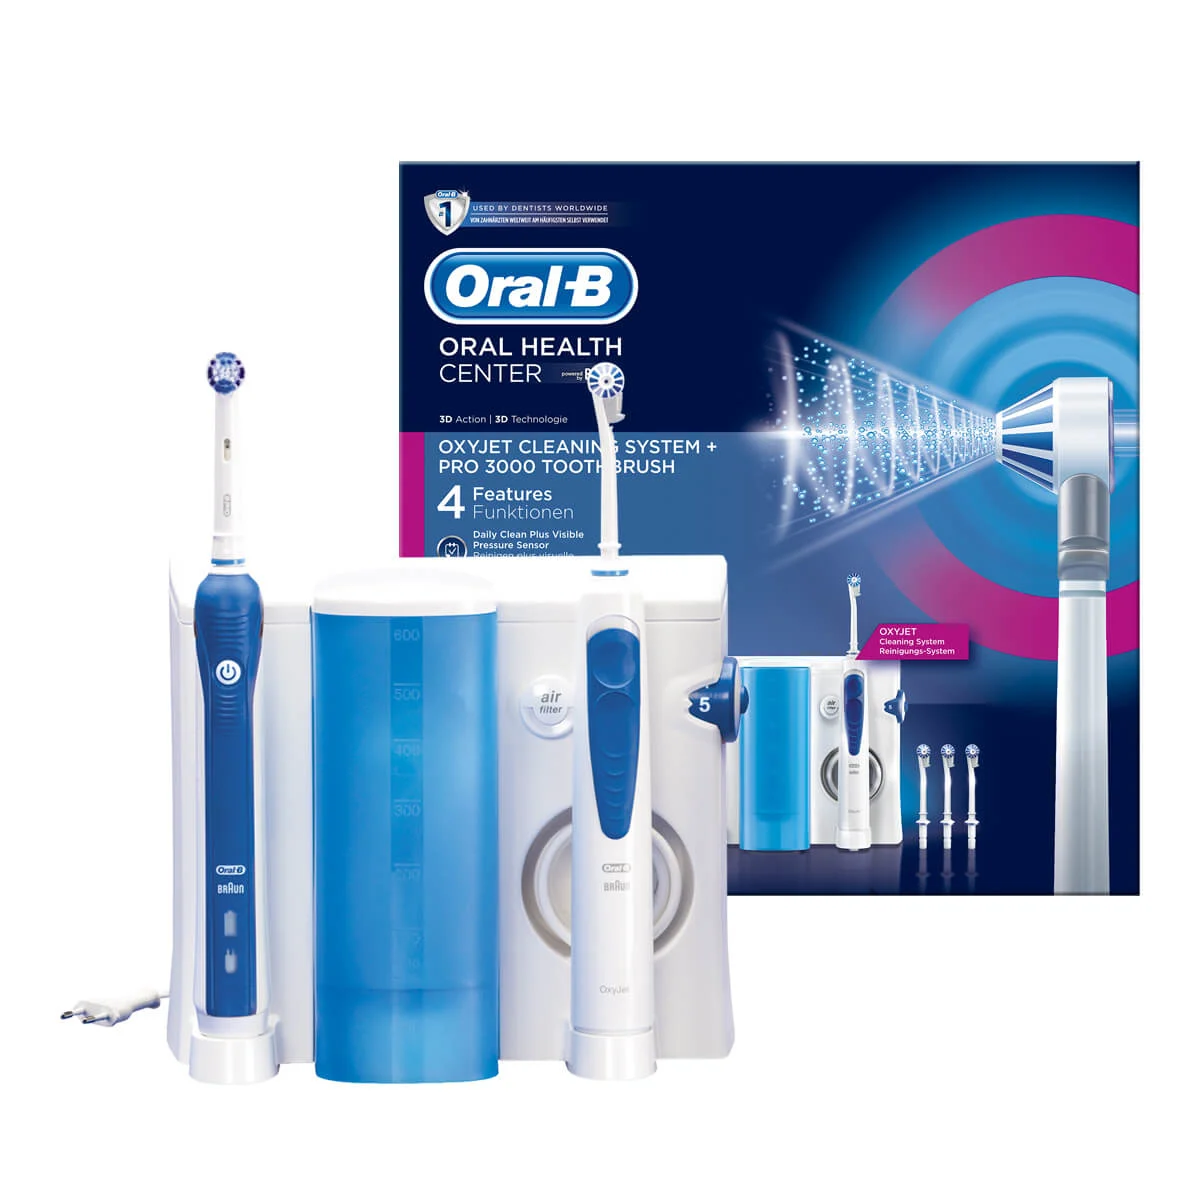 Oral-B Oral Health Center: Oxyjet Cleaning System + PRO 3000 Electric Toothbrush undefined